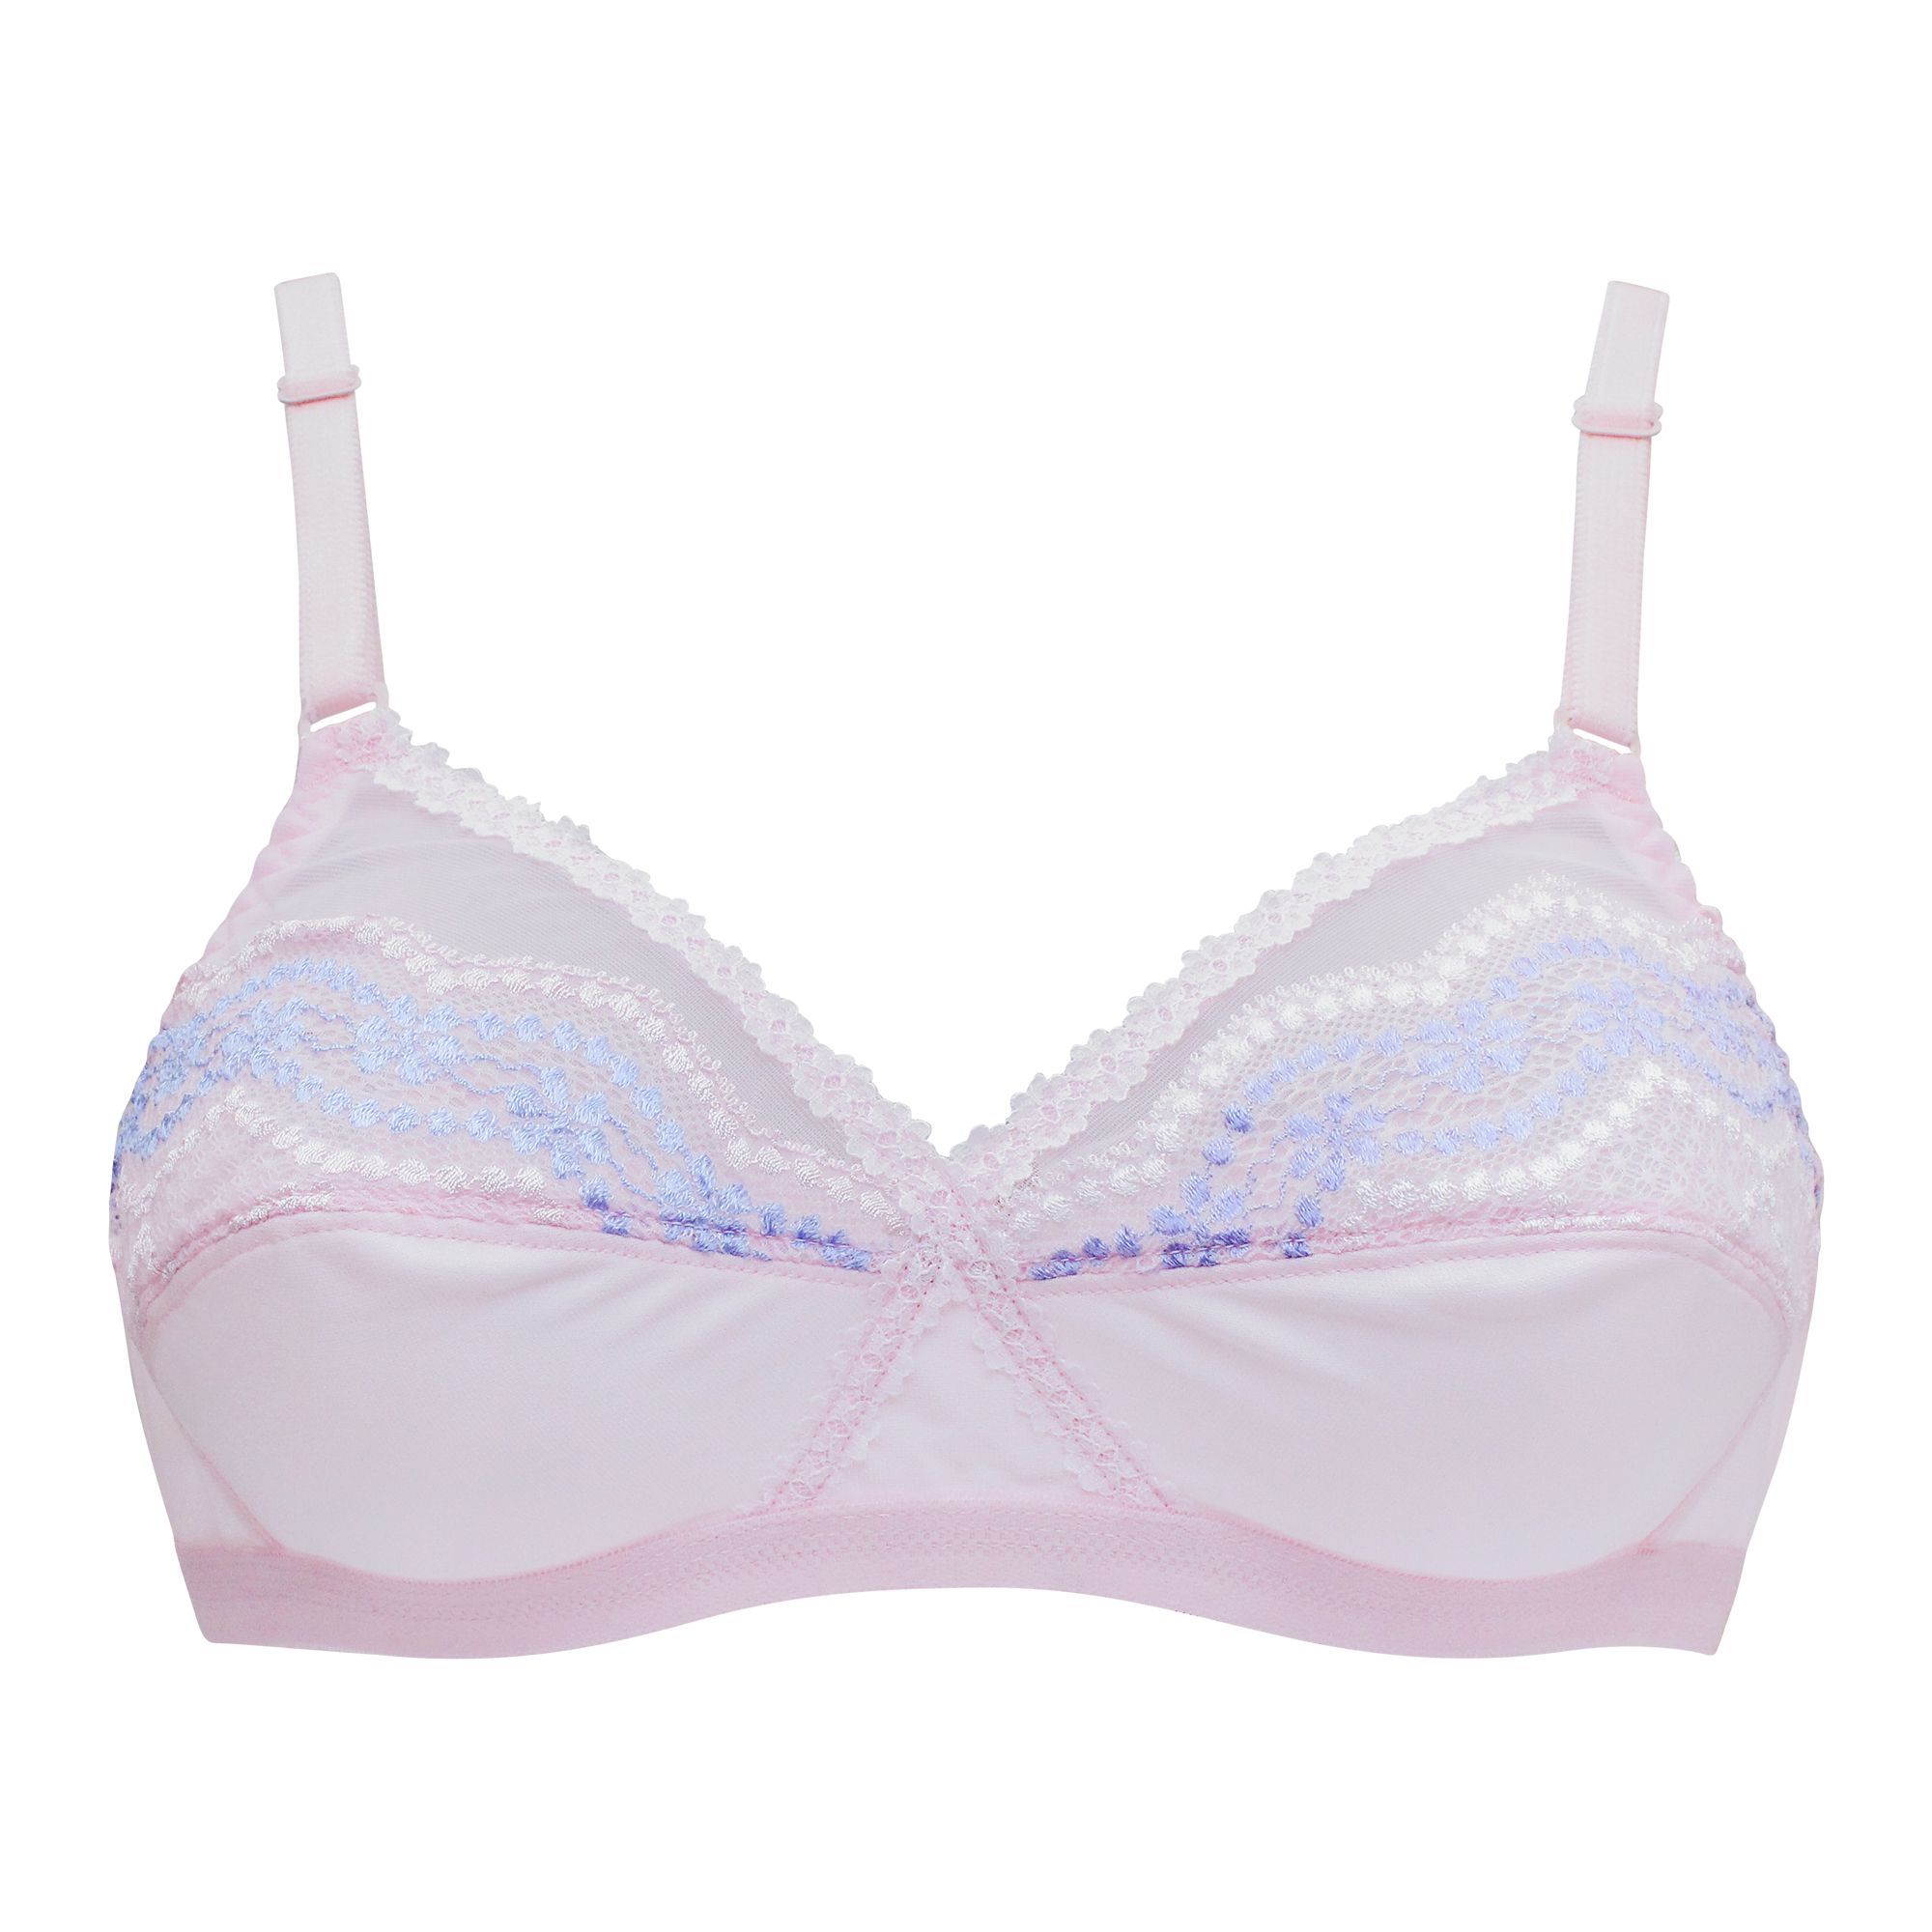 Purchase IFG Mystique N Bra, Pink Online at Special Price in